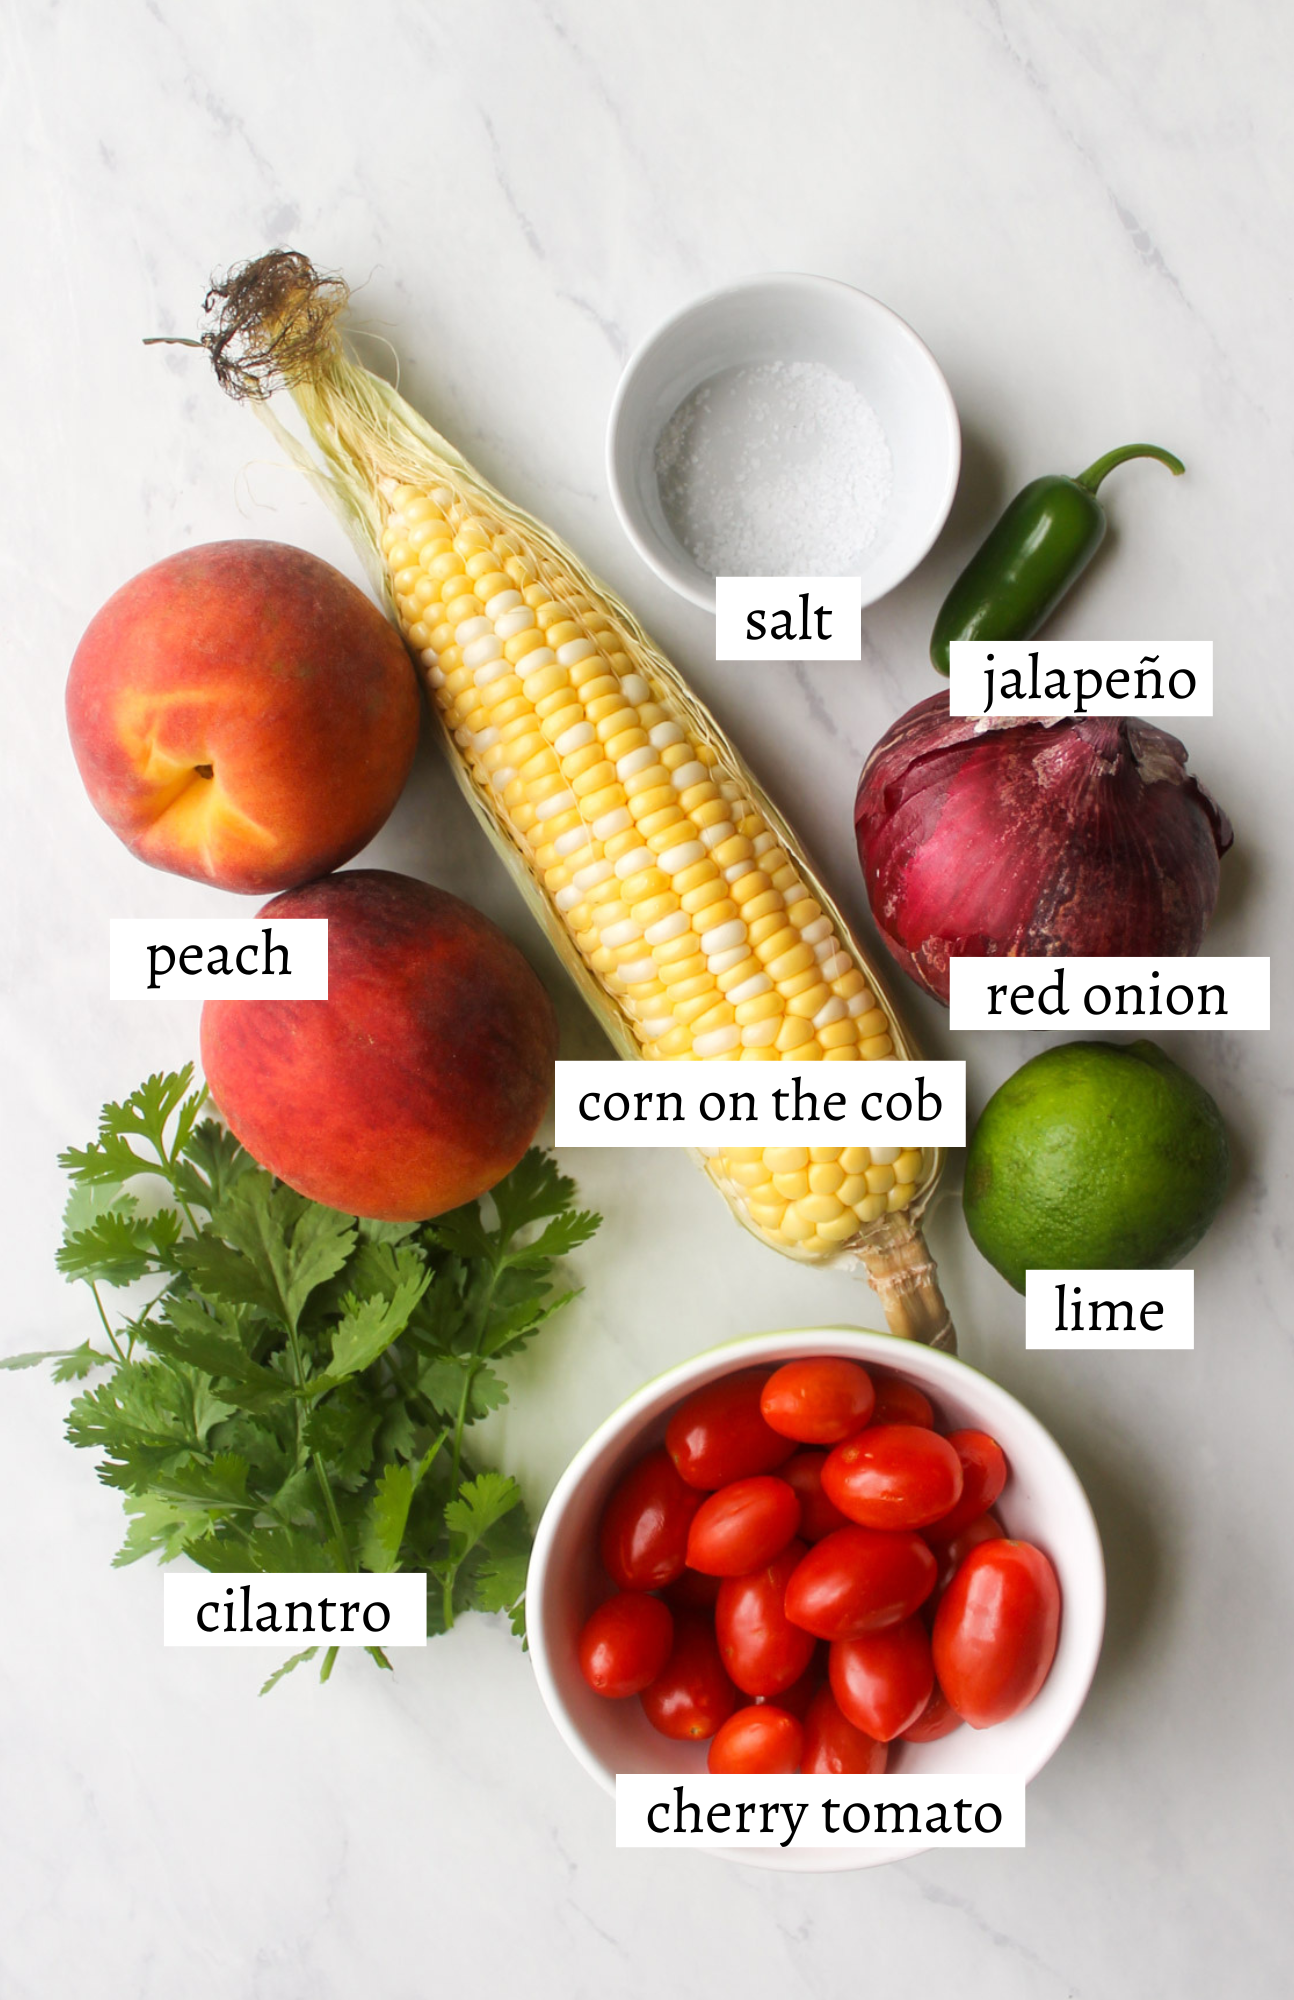 Labeled ingredients for peach corn salsa.